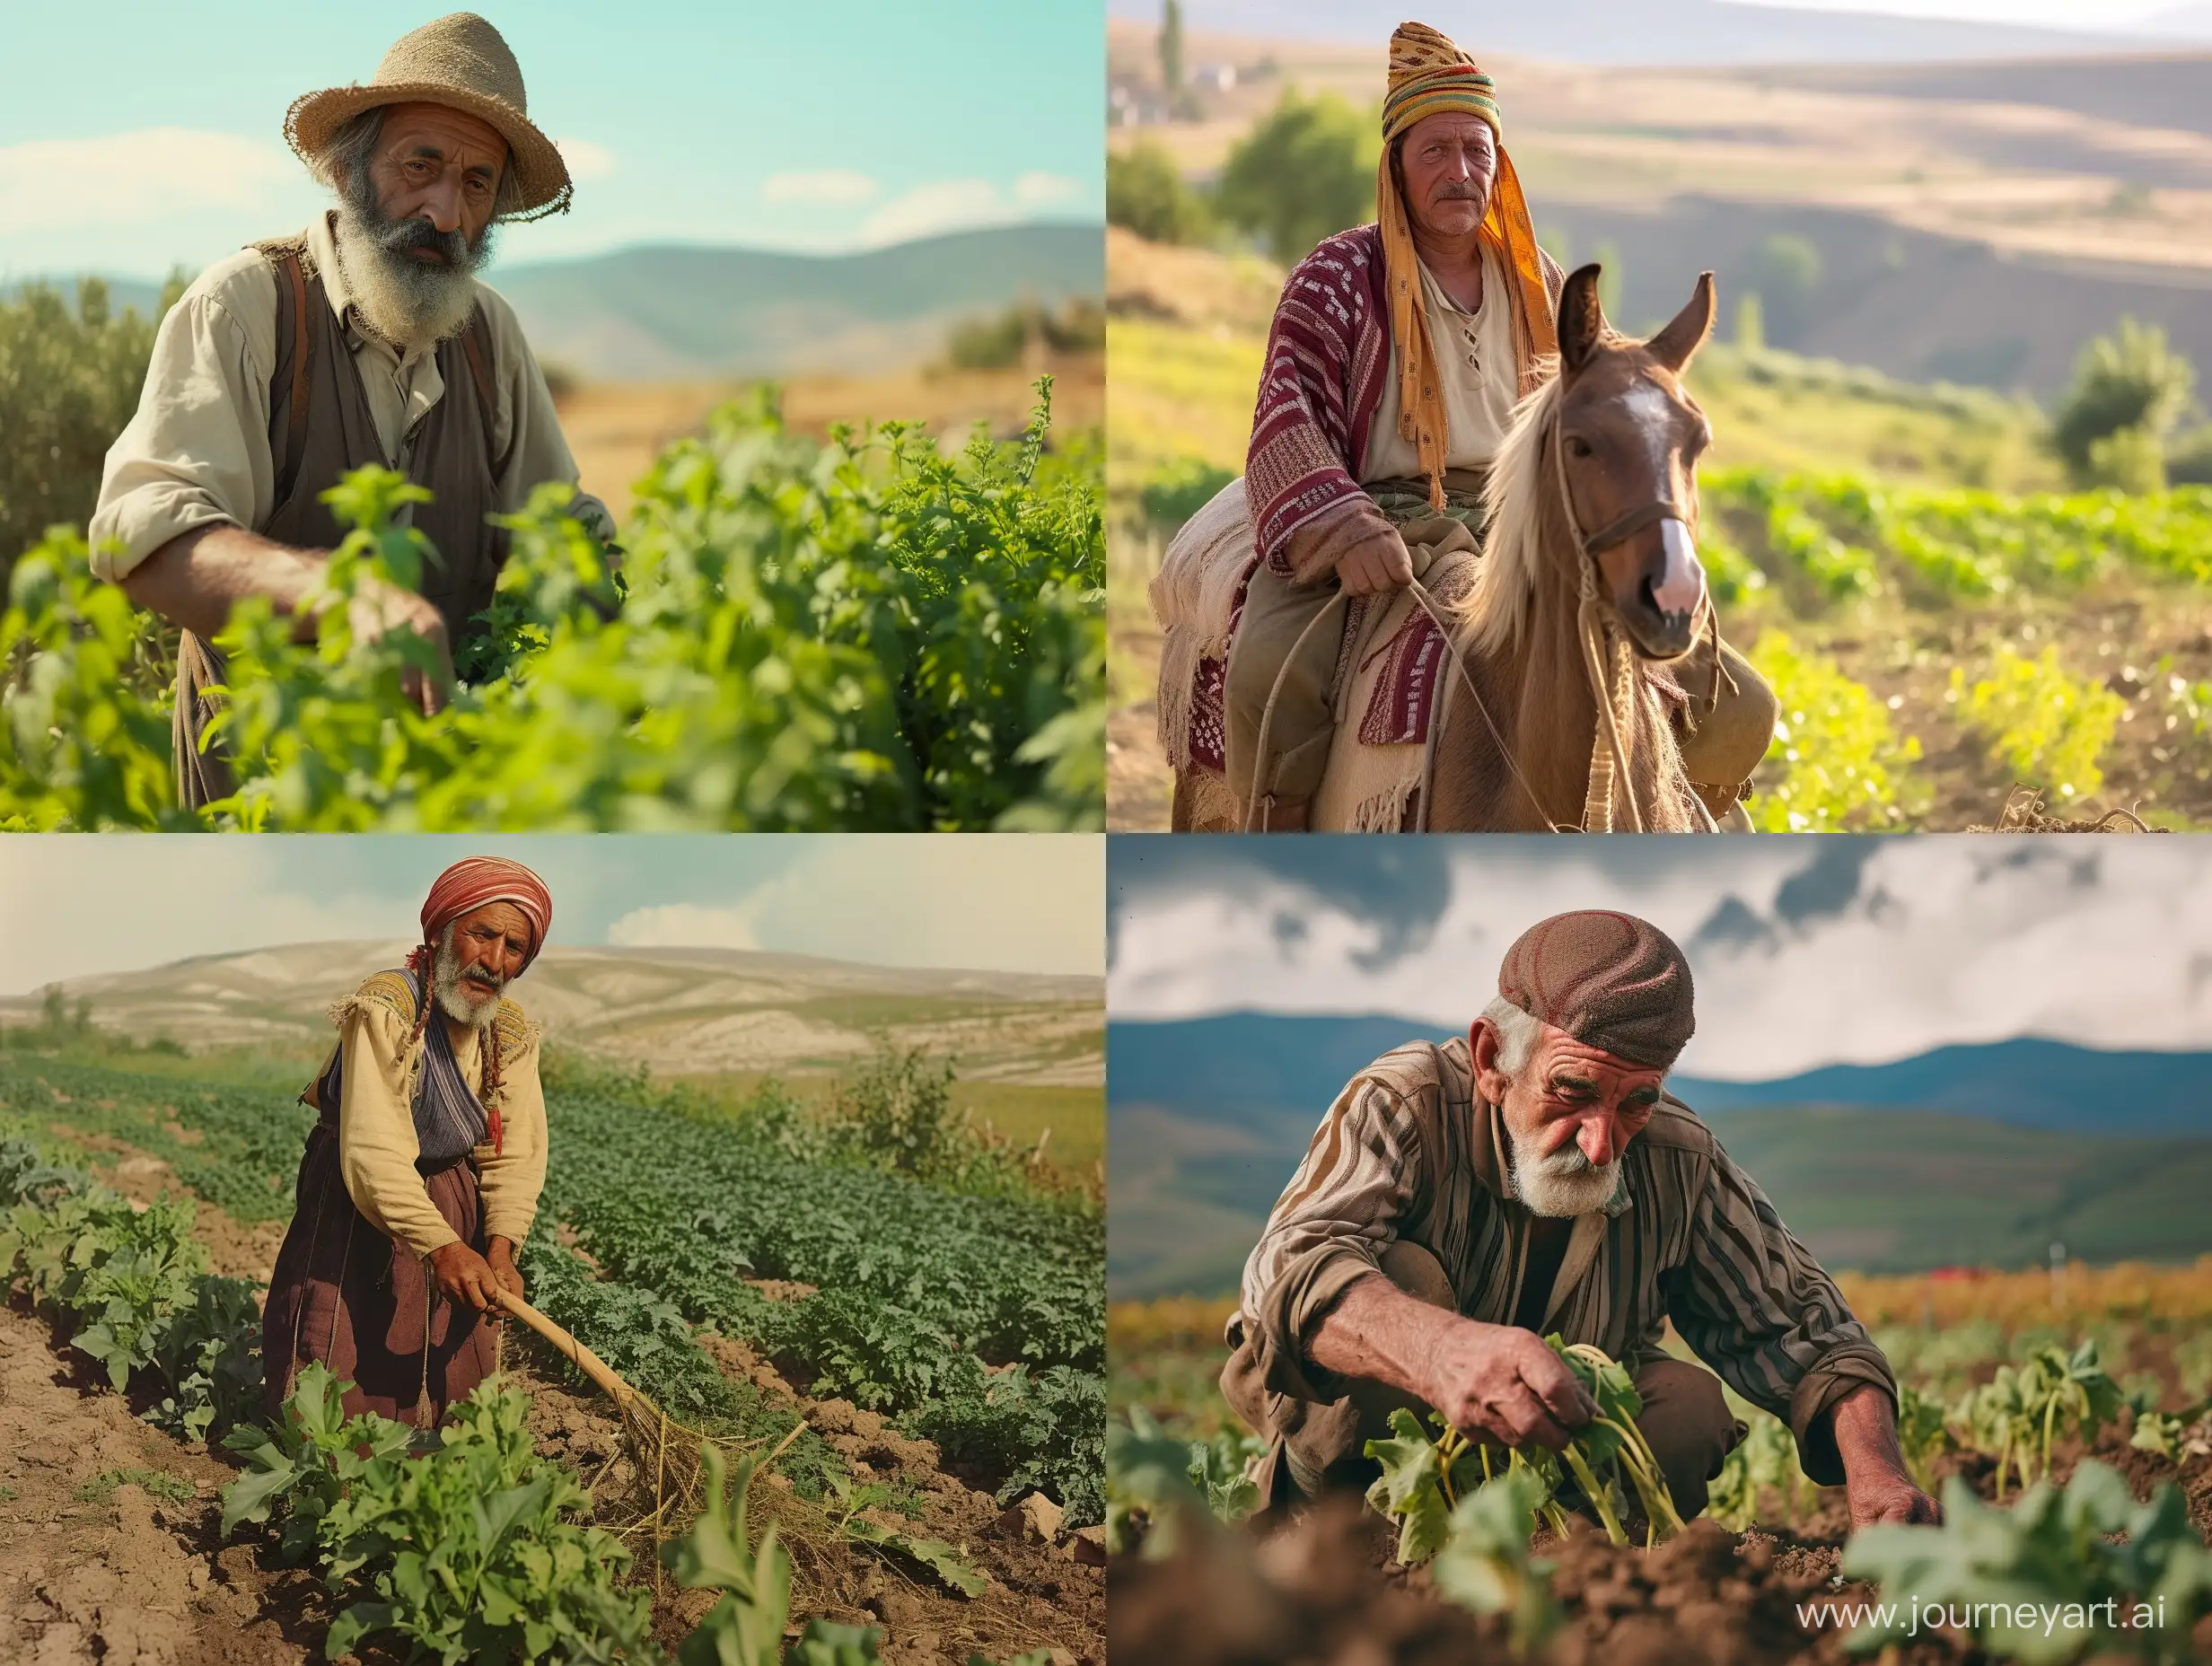 An Anatolian neolithic Farmer who does agriculture